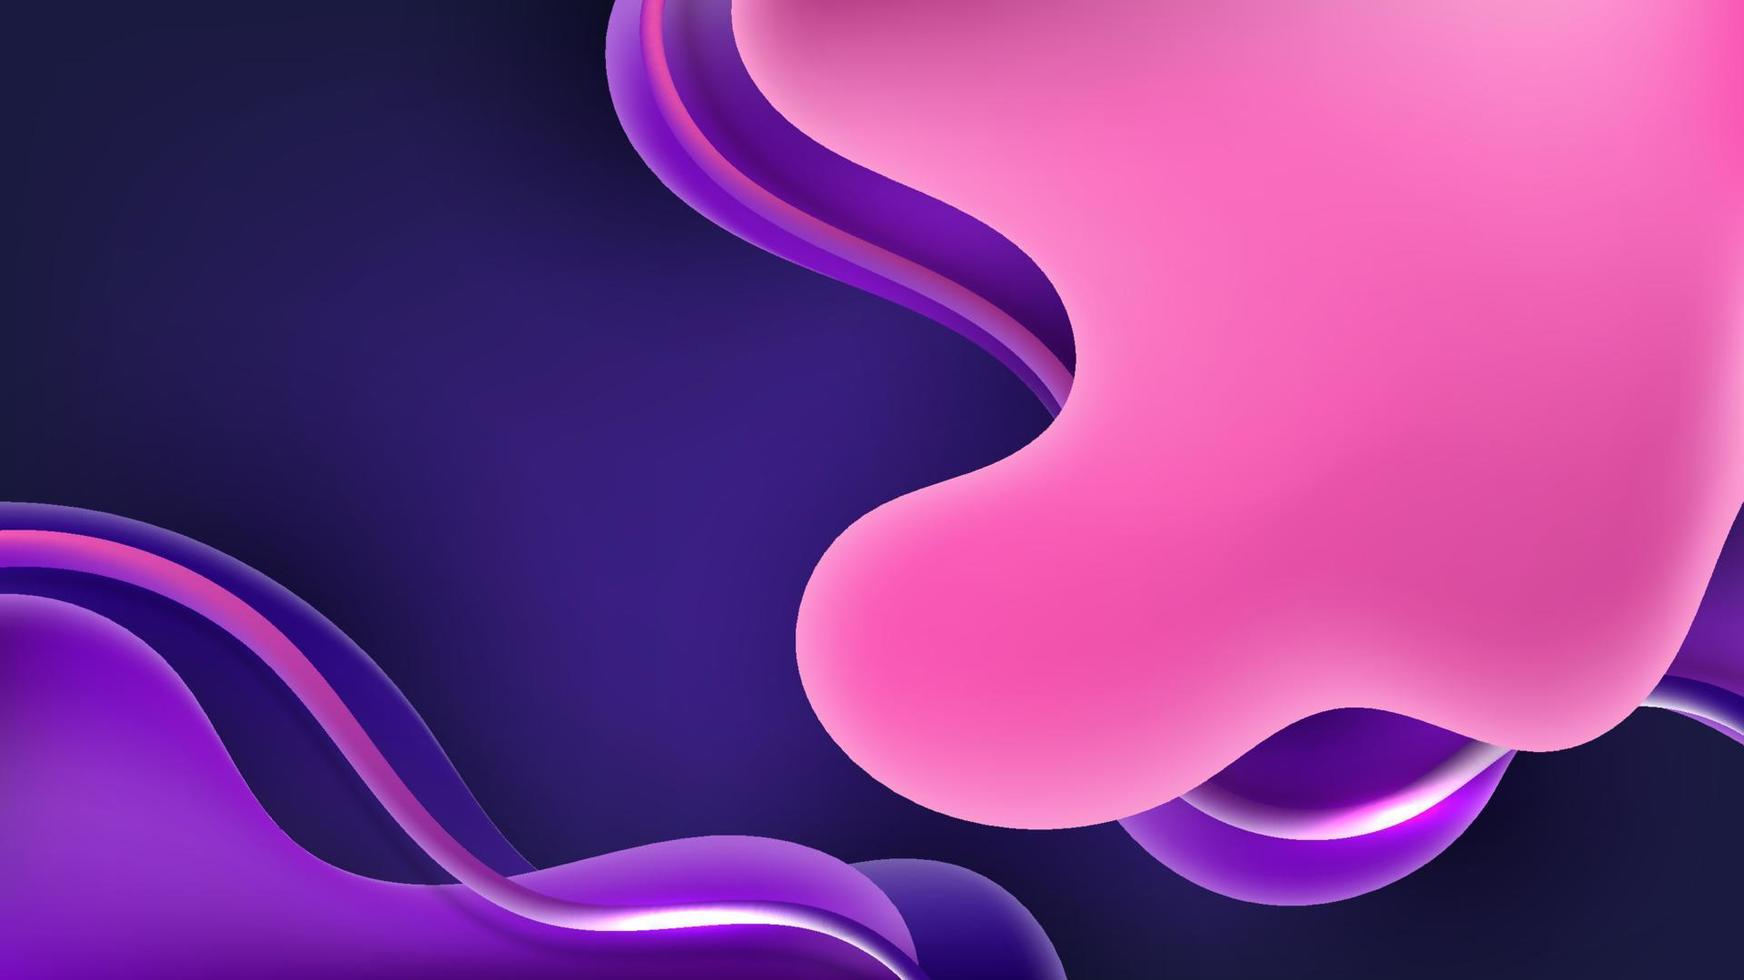 Abstract fluid gradient shapes with 3d wave lines elements on blue background vector